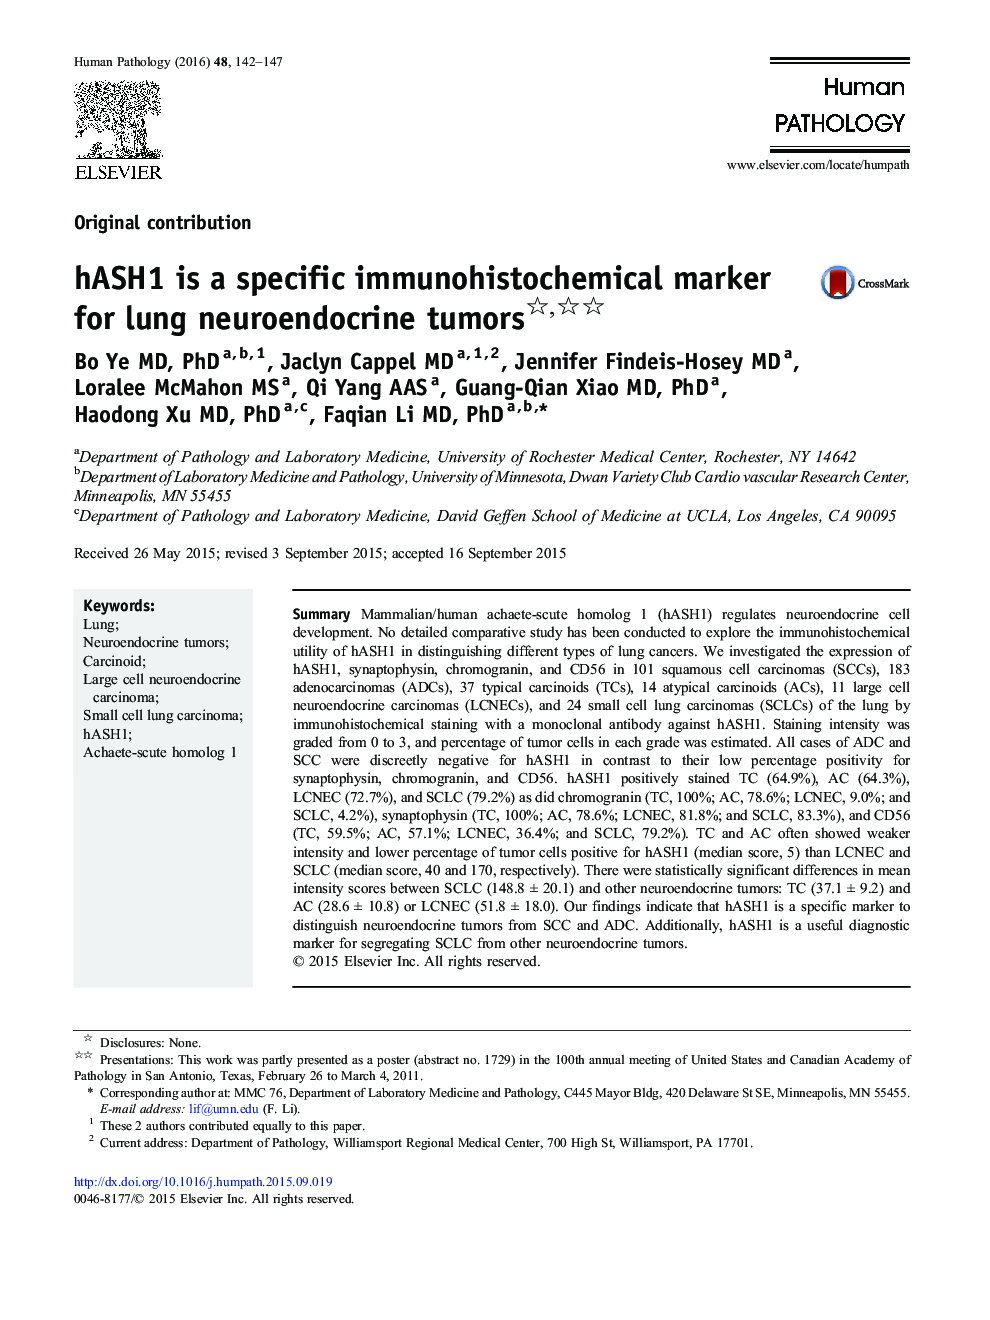 hASH1 is a specific immunohistochemical marker for lung neuroendocrine tumors 